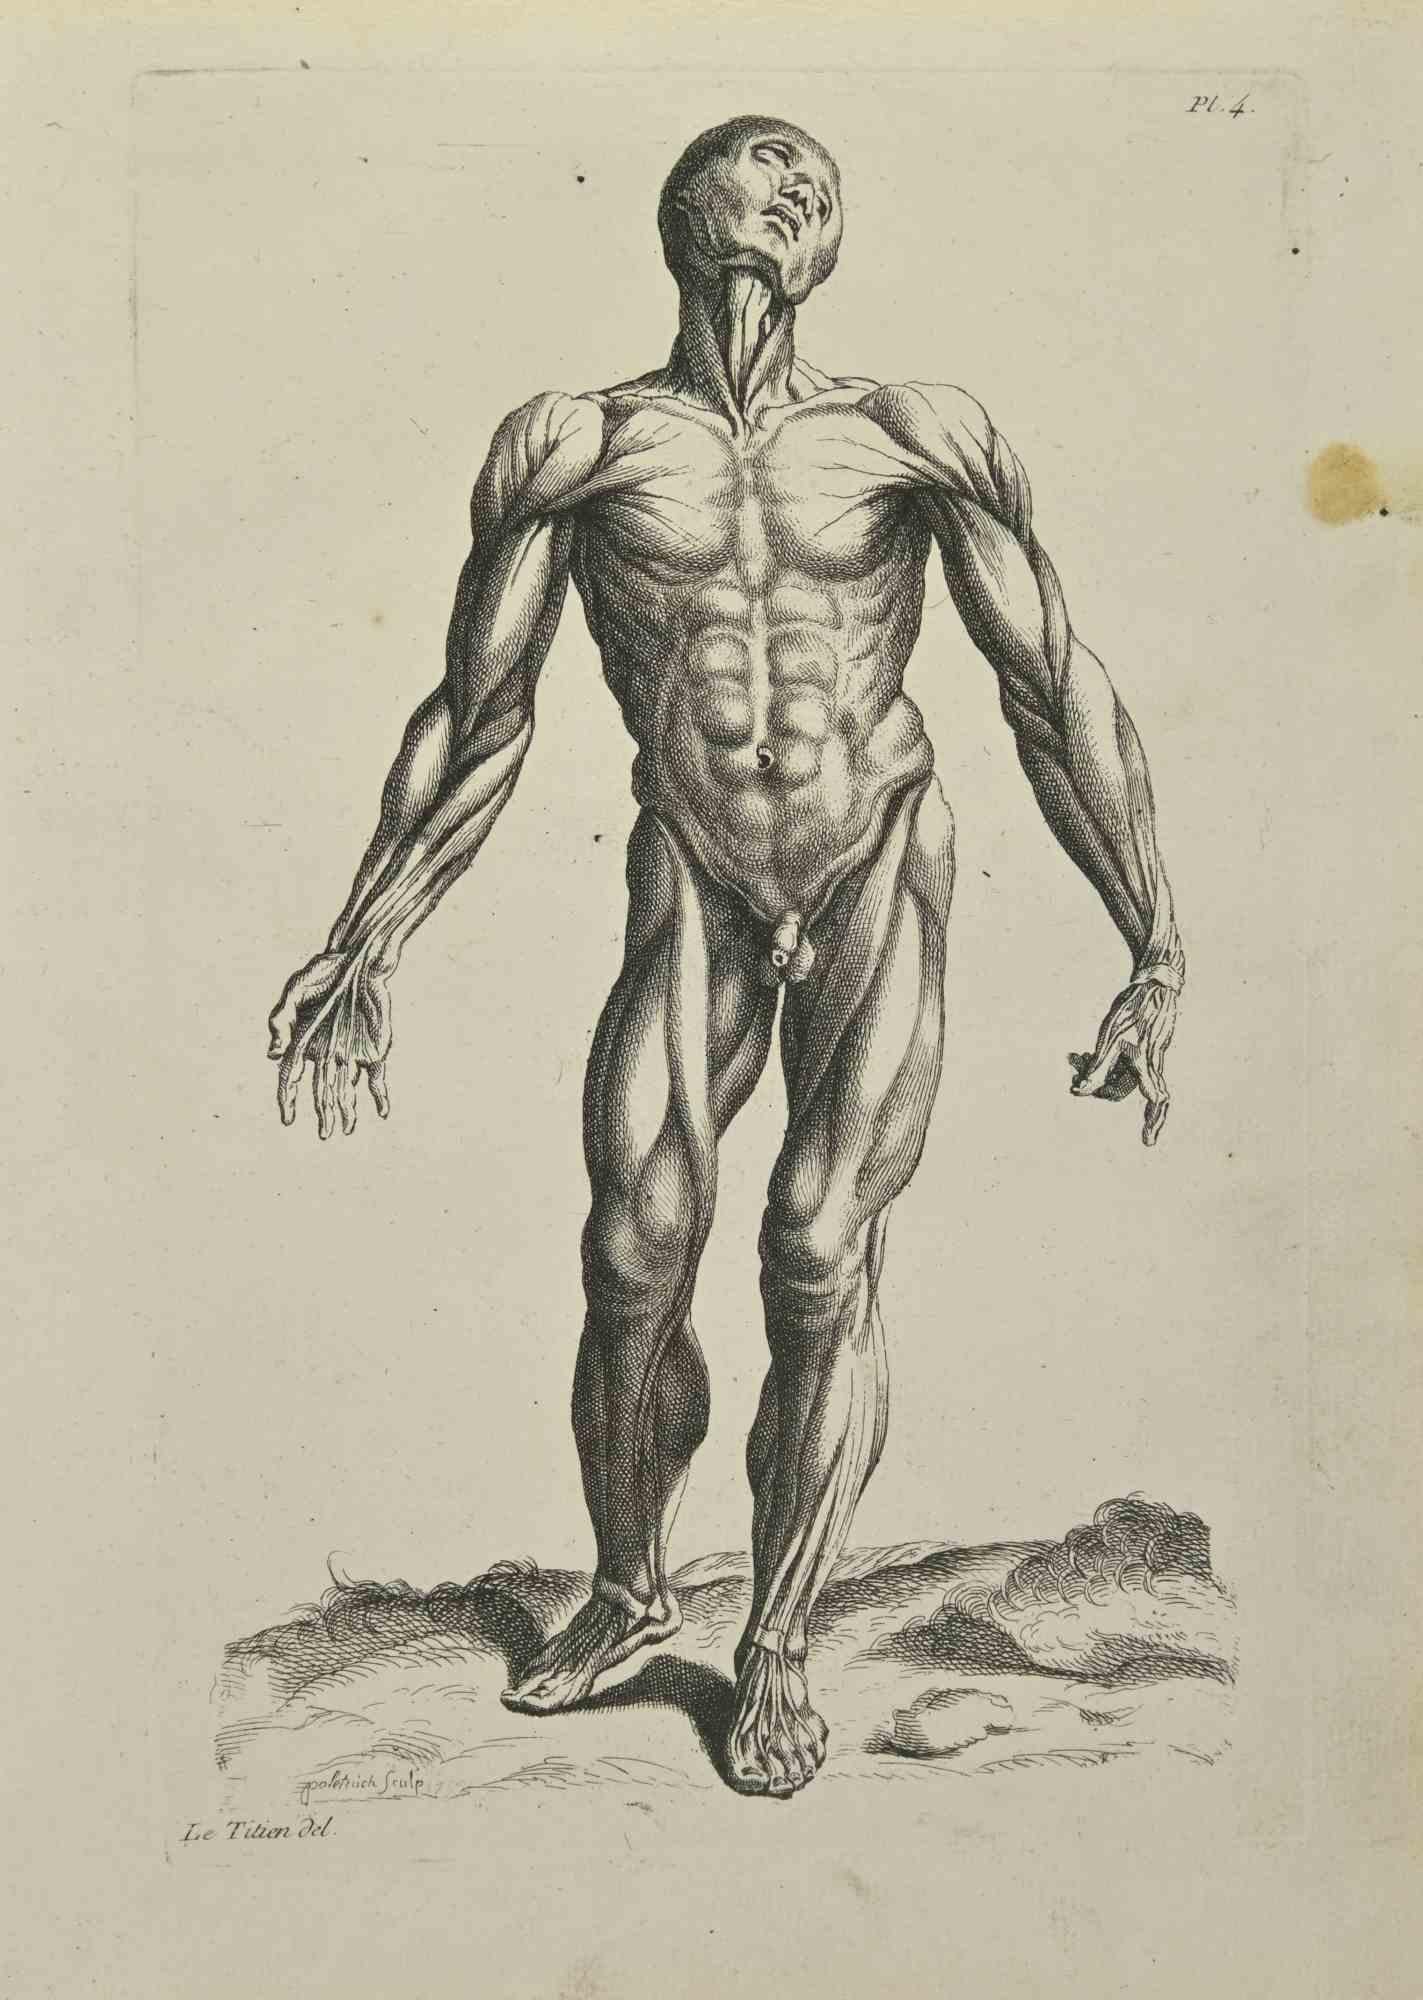 Anatomy Studies Muscles  after Titian is an etching realized by Jean Francois Poletnich in 1755.

Signed in the plate.

Good conditions with foxing and stain.

The artwork is depicted through confident strokes.

The etching was realized for the